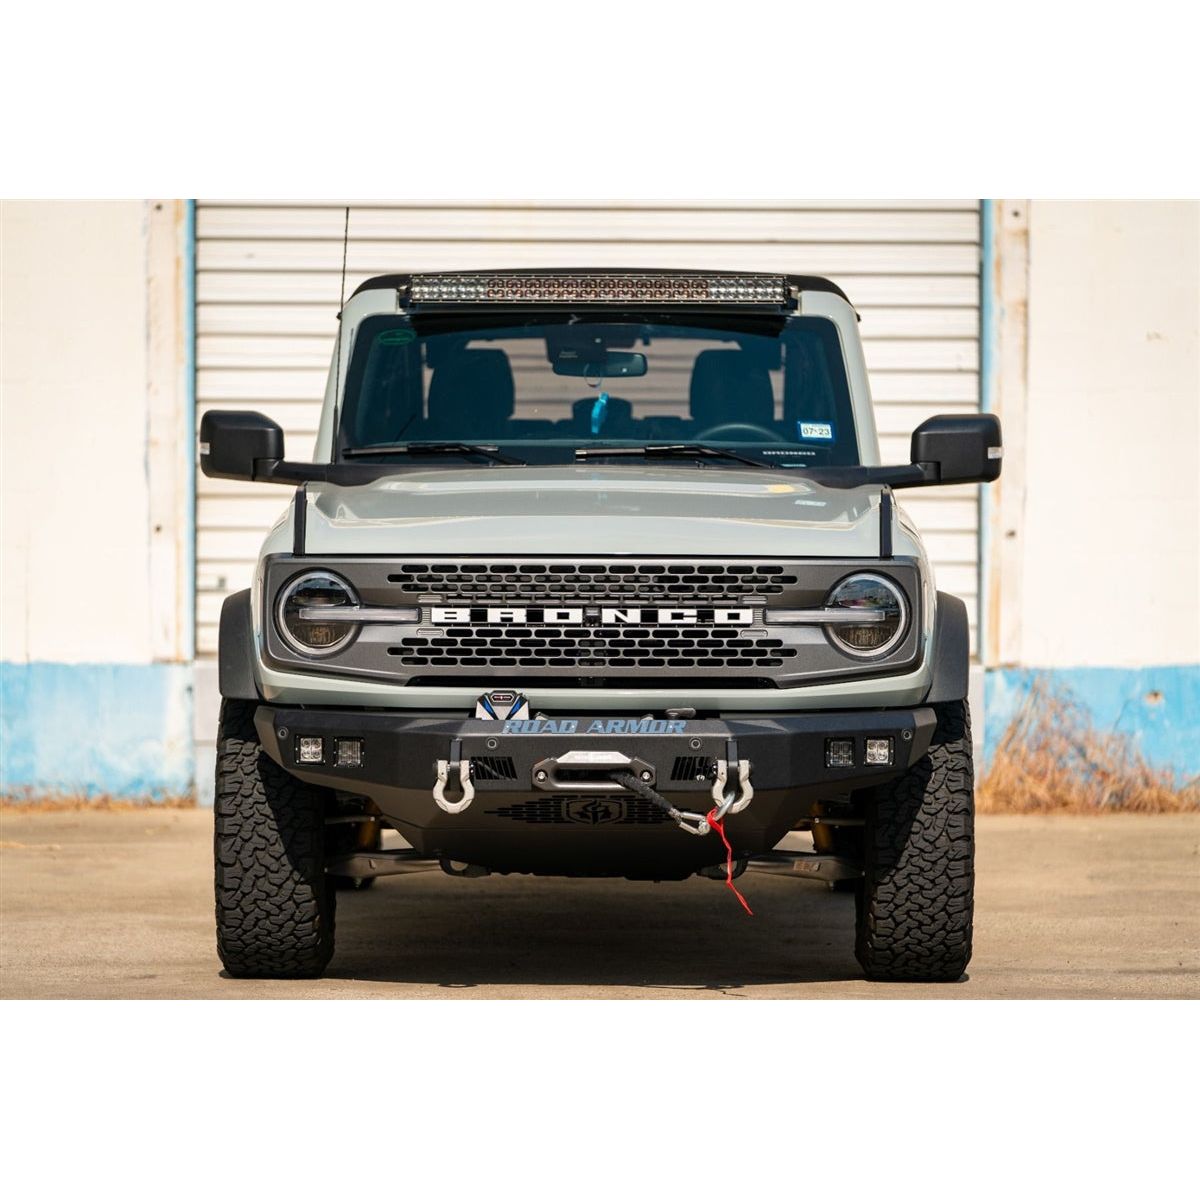 Road Armor Stealth Base Front - Recessed Winch for 2021-C Ford Bronco